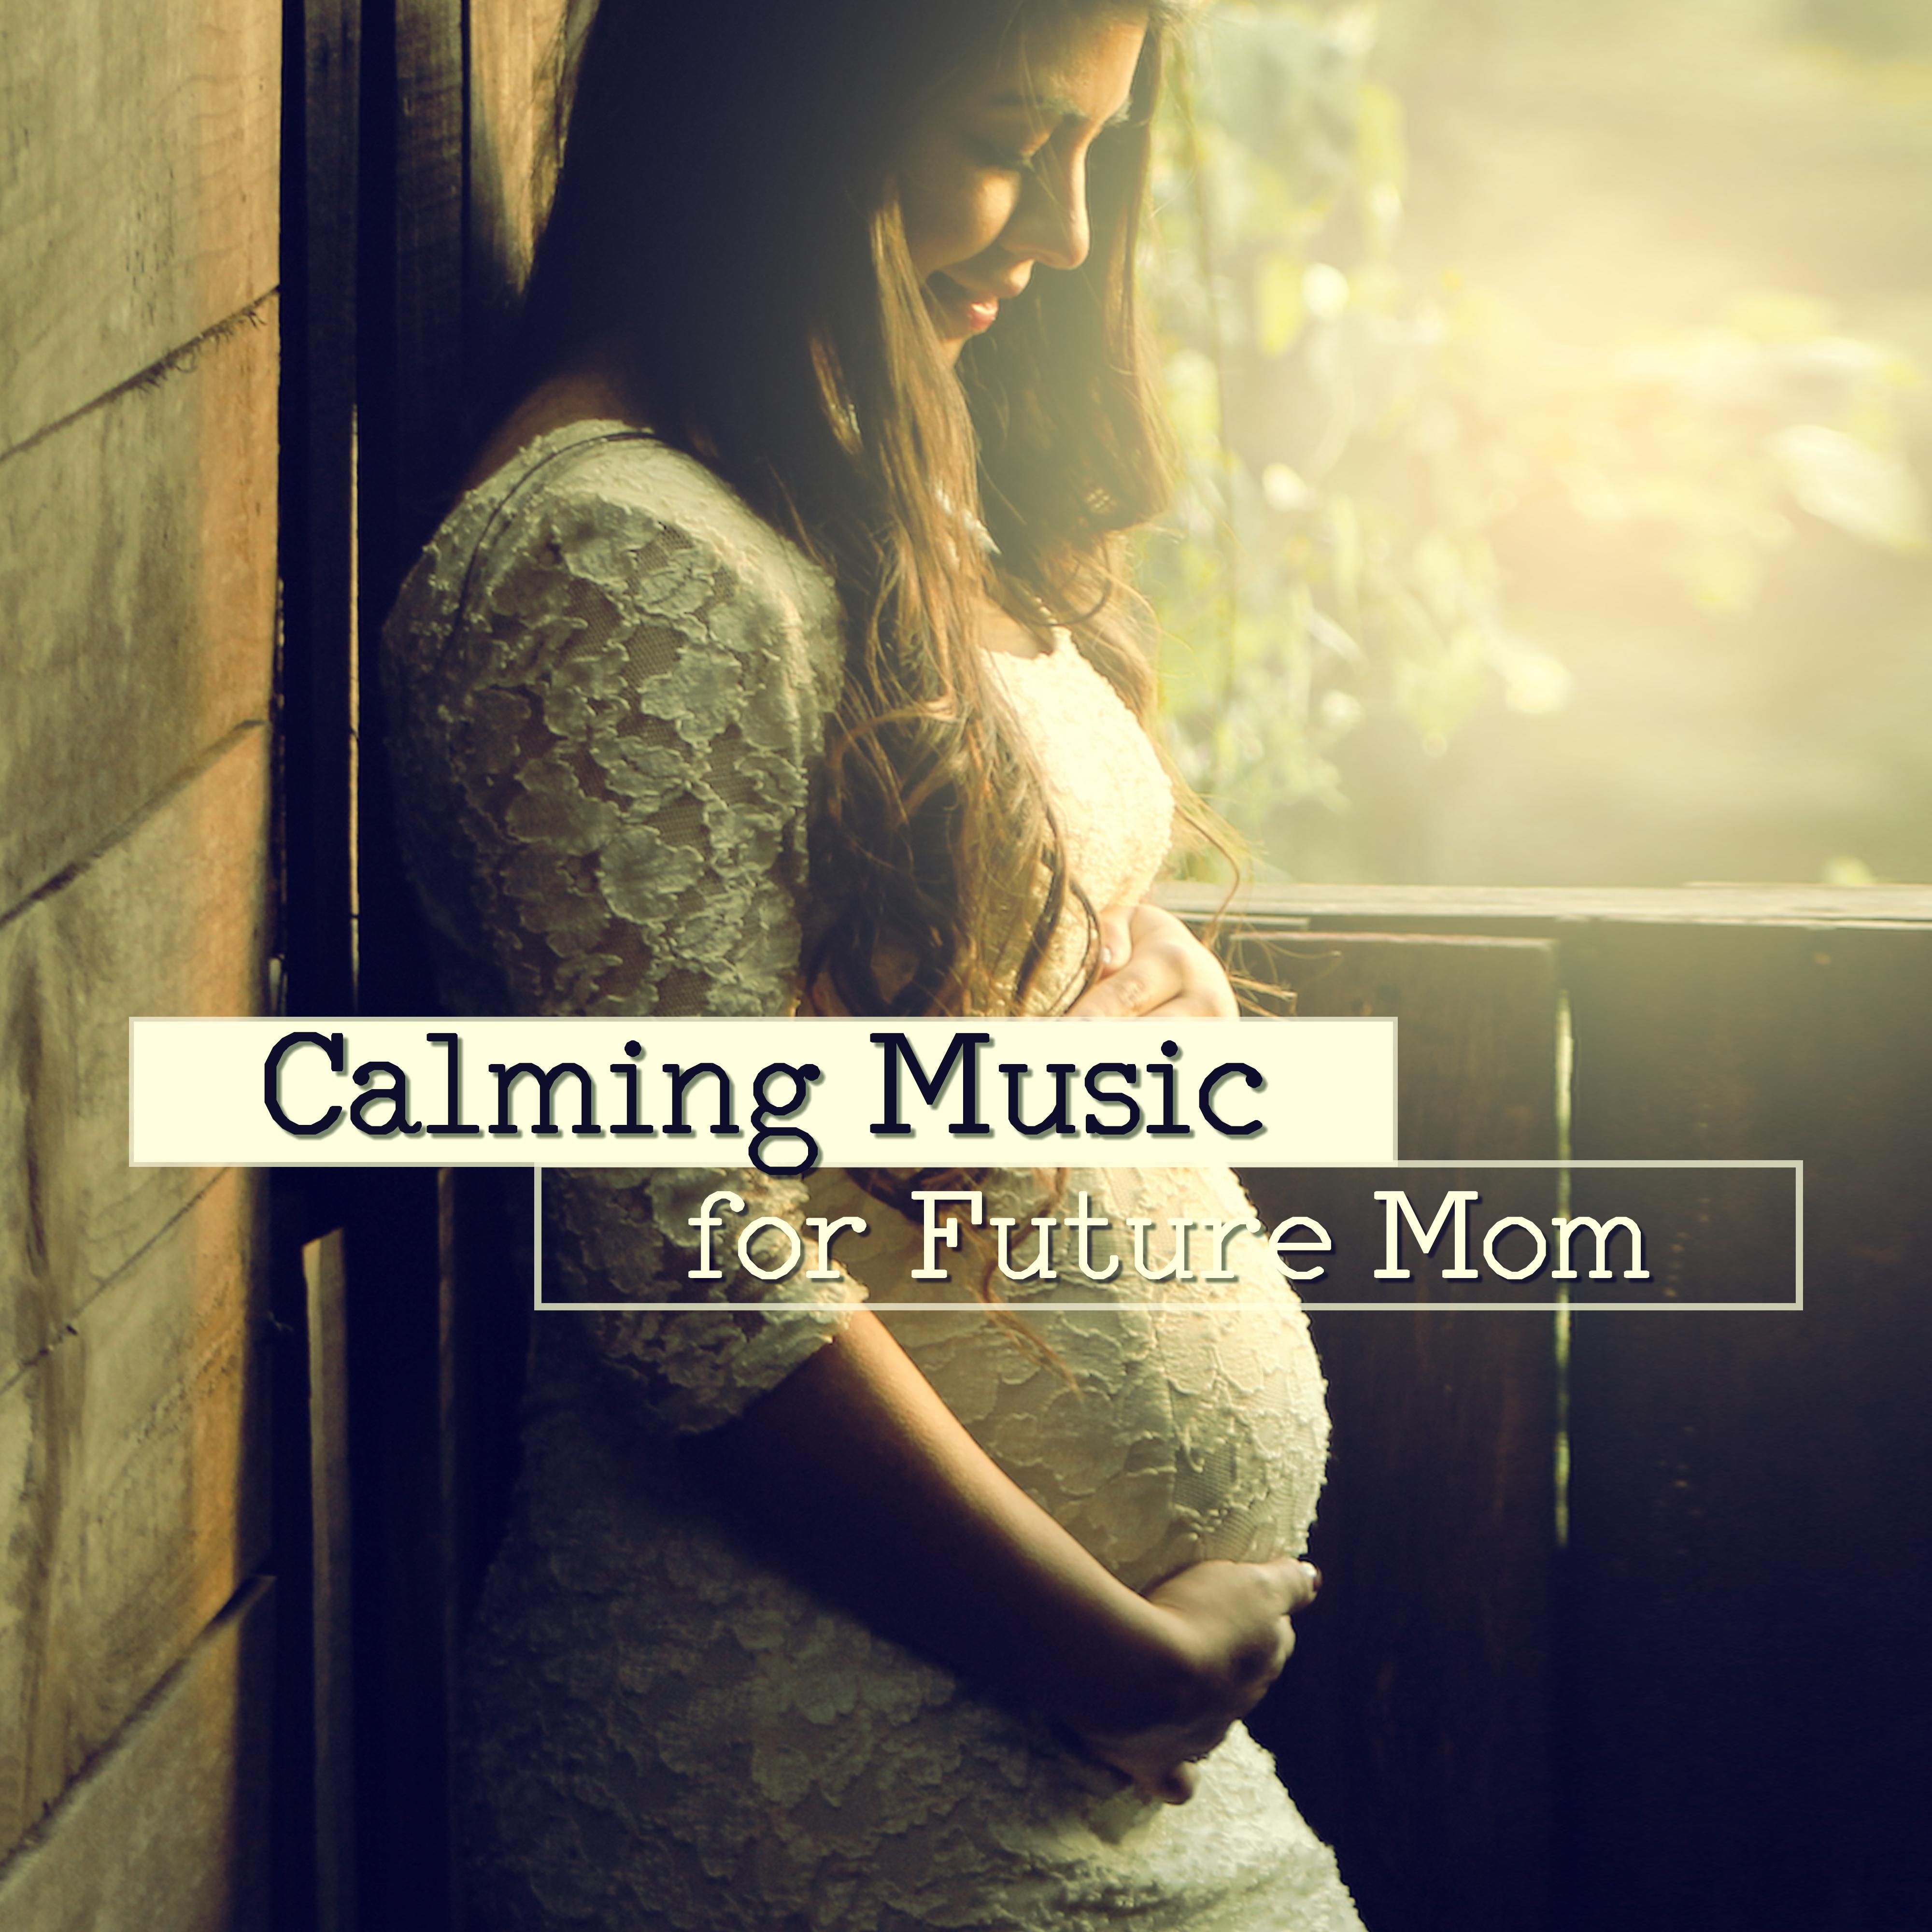 Calming Music for Future Mom – Pregnancy Music, Soothing Sounds, Prenatal Yoga, Zen Music, Stress Relief, Deep Sleep, Healing Music for Pregnant Woman